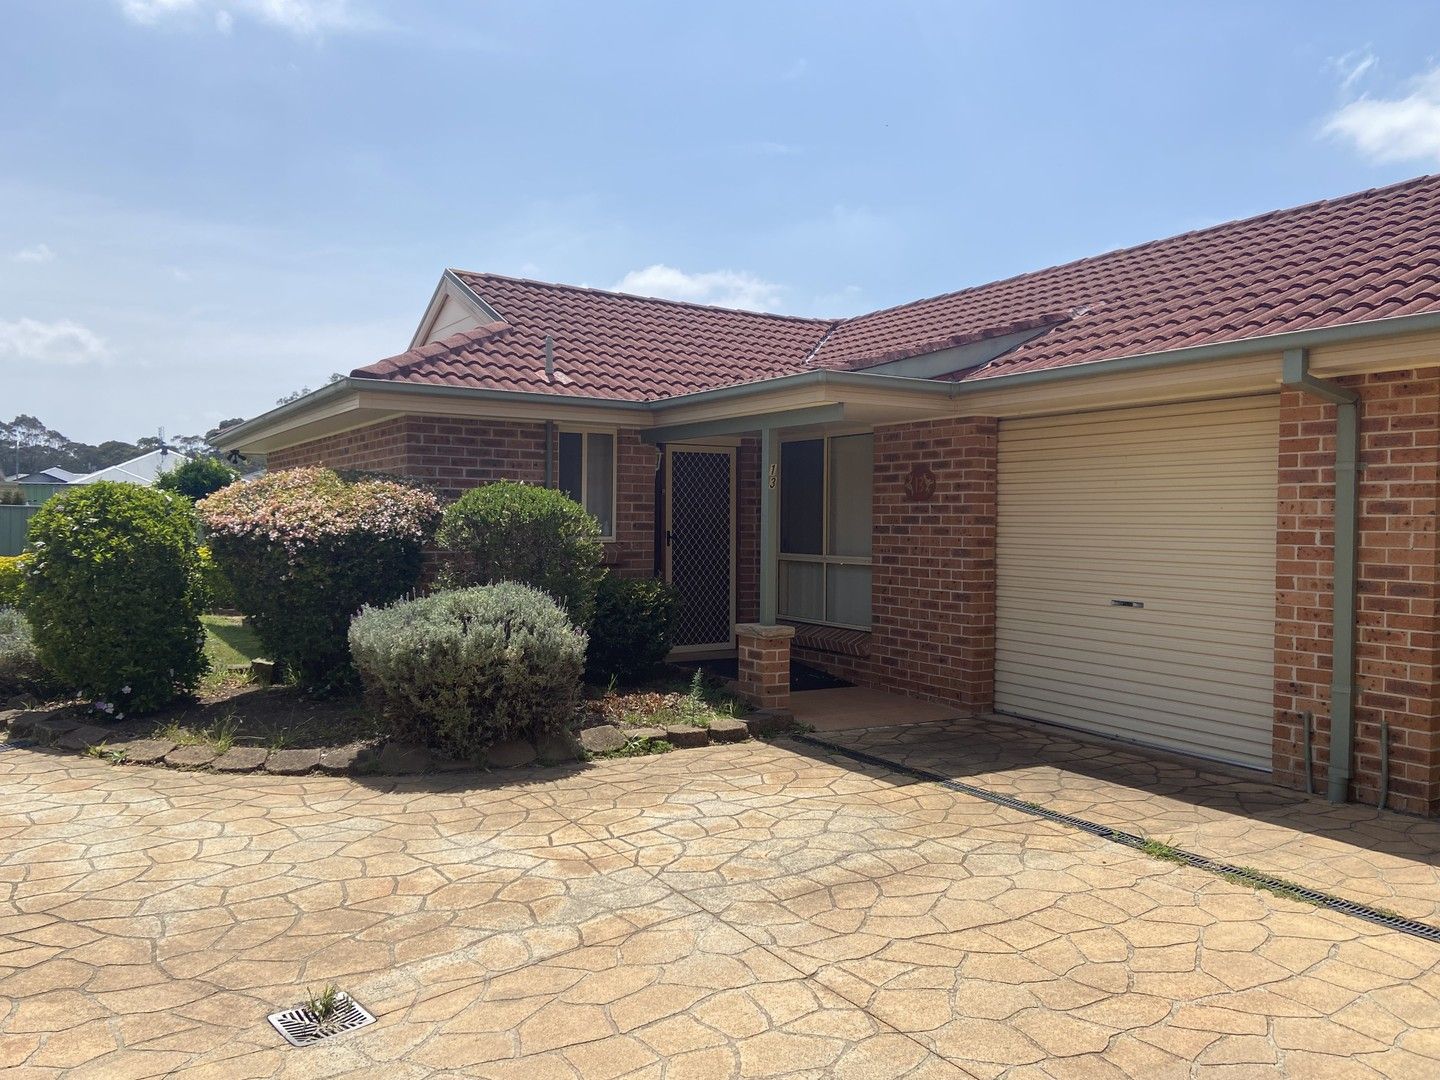 2 bedrooms House in 13/24 Macquarie Place TAHMOOR NSW, 2573